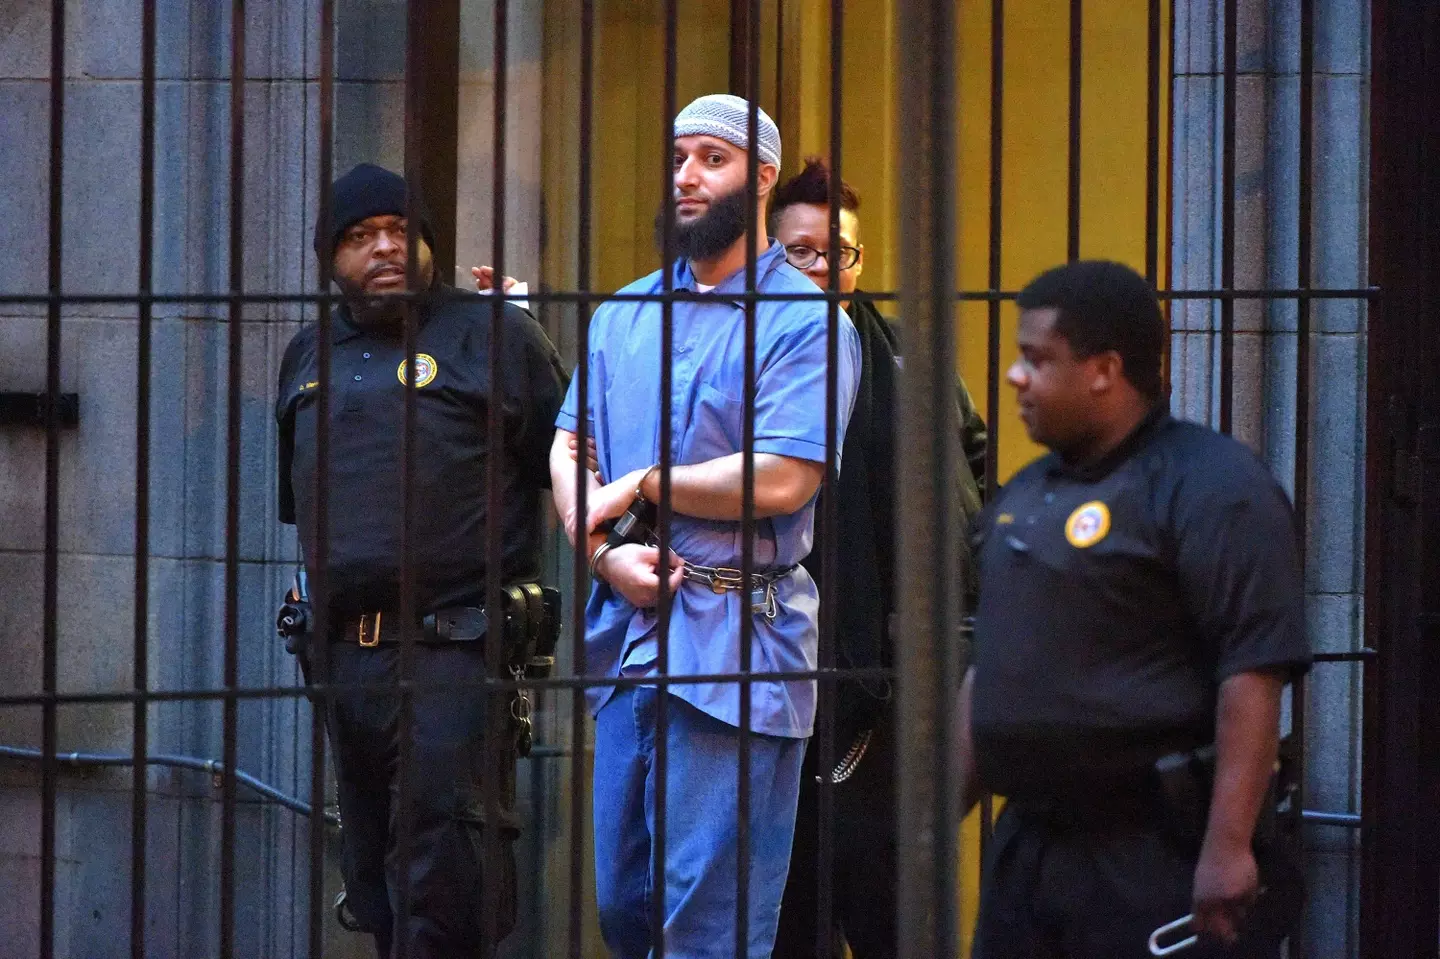 Adnan Syed was sentenced to life in prison for murder.